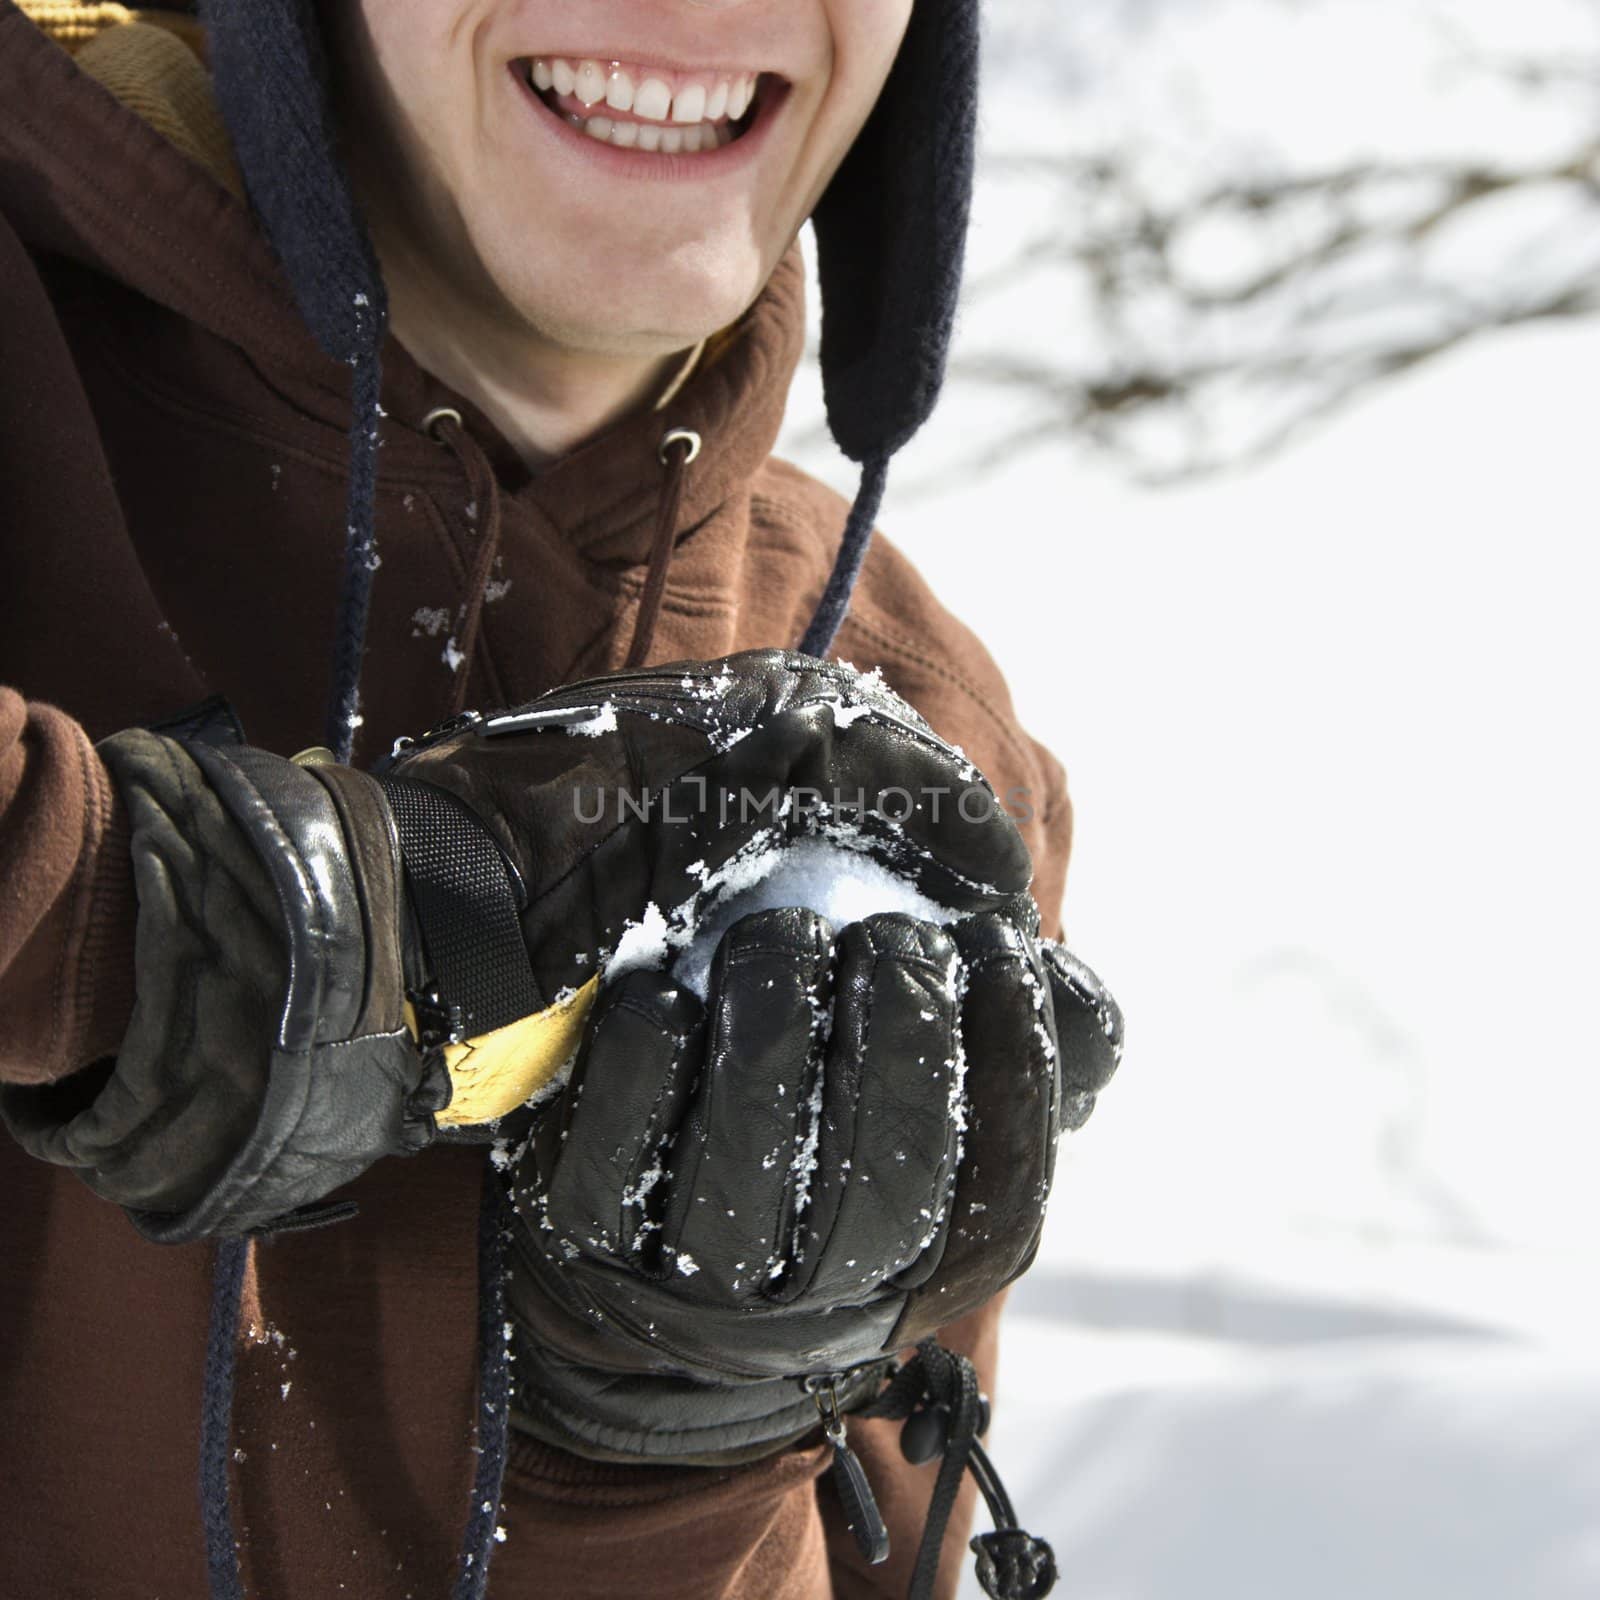 Caucasian male teenager making snowball in winter setting.